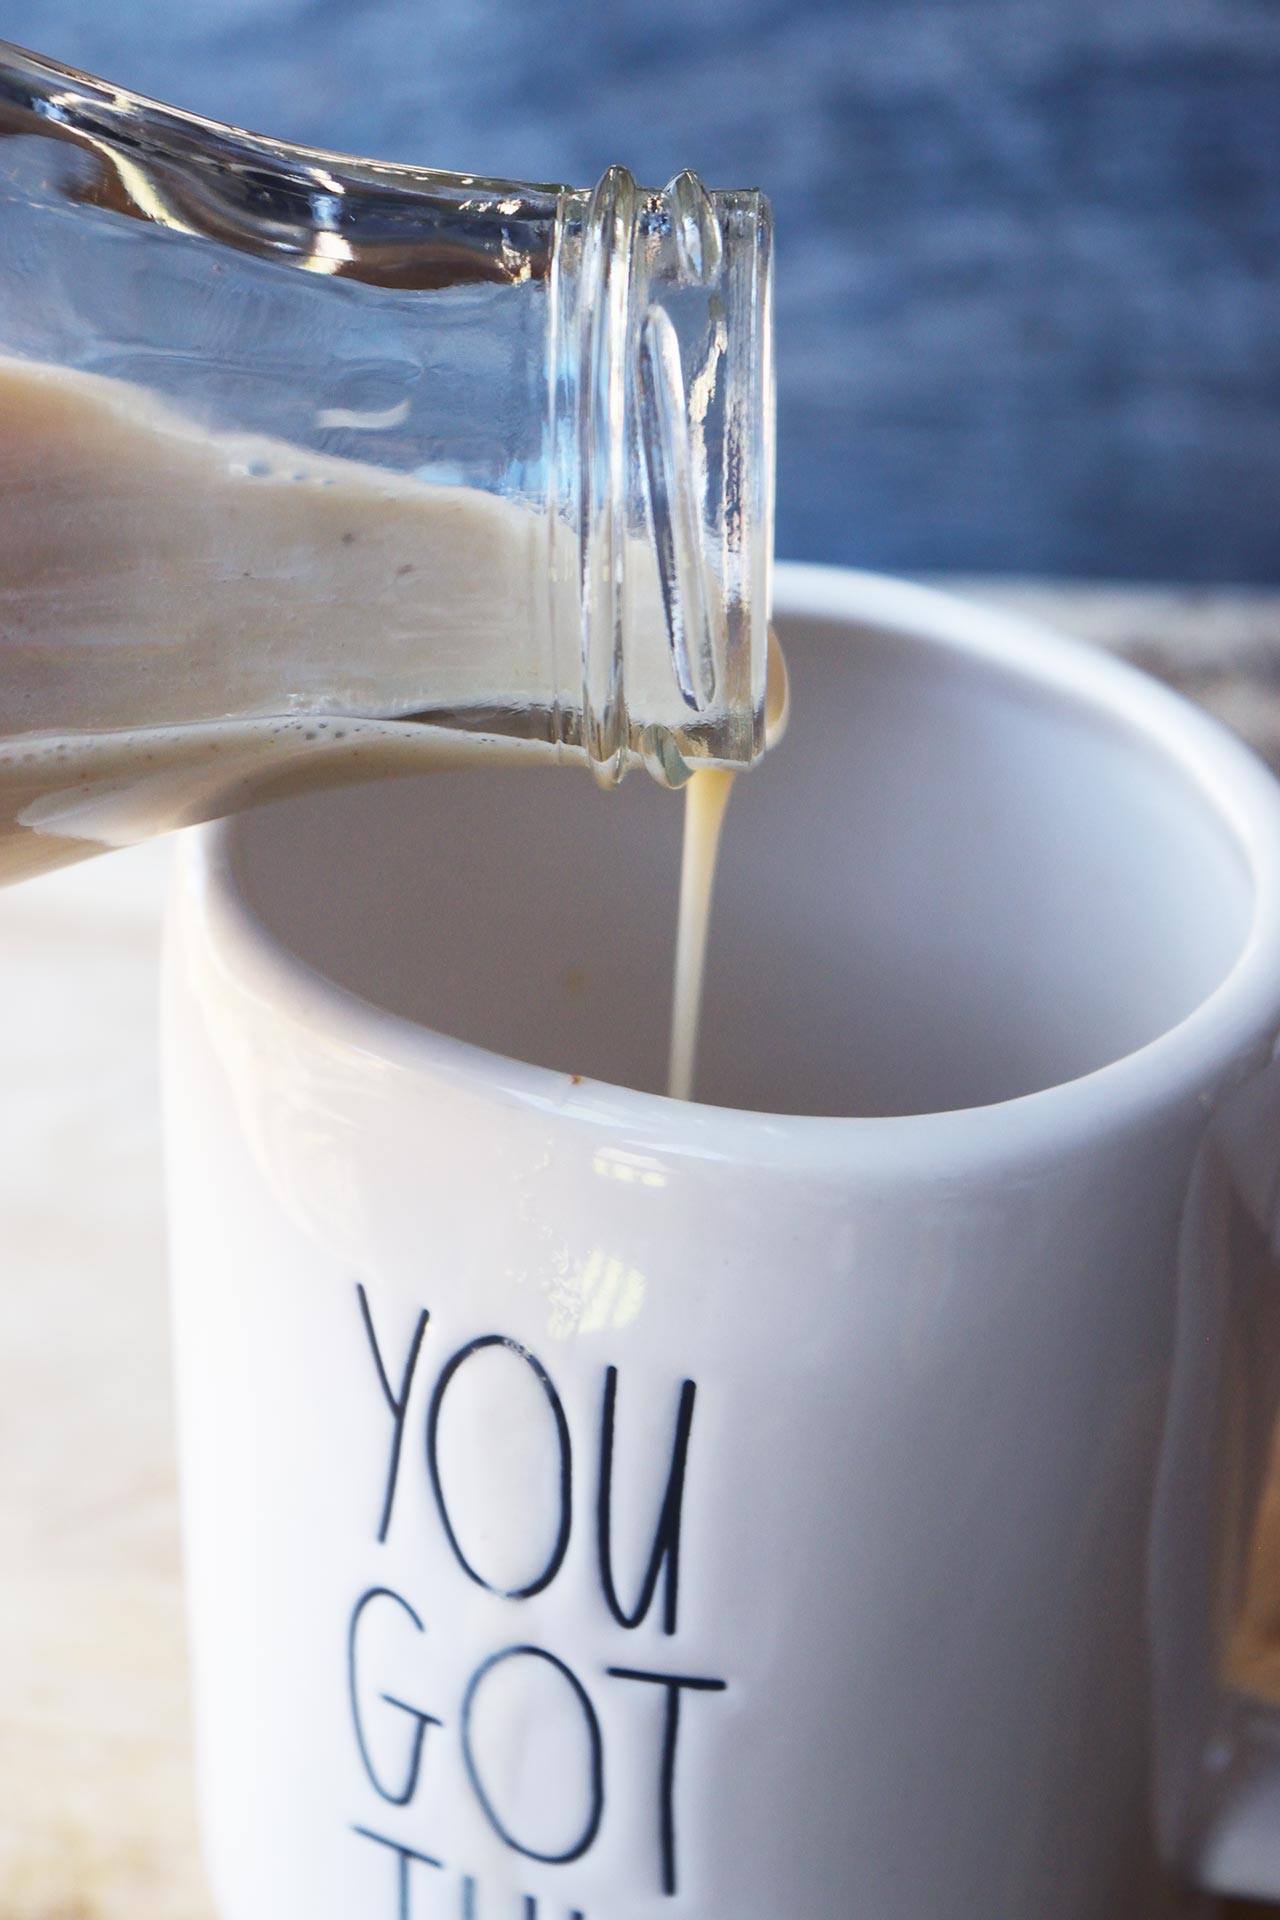 A glass bottle pouring Condensed Milk into a mug.